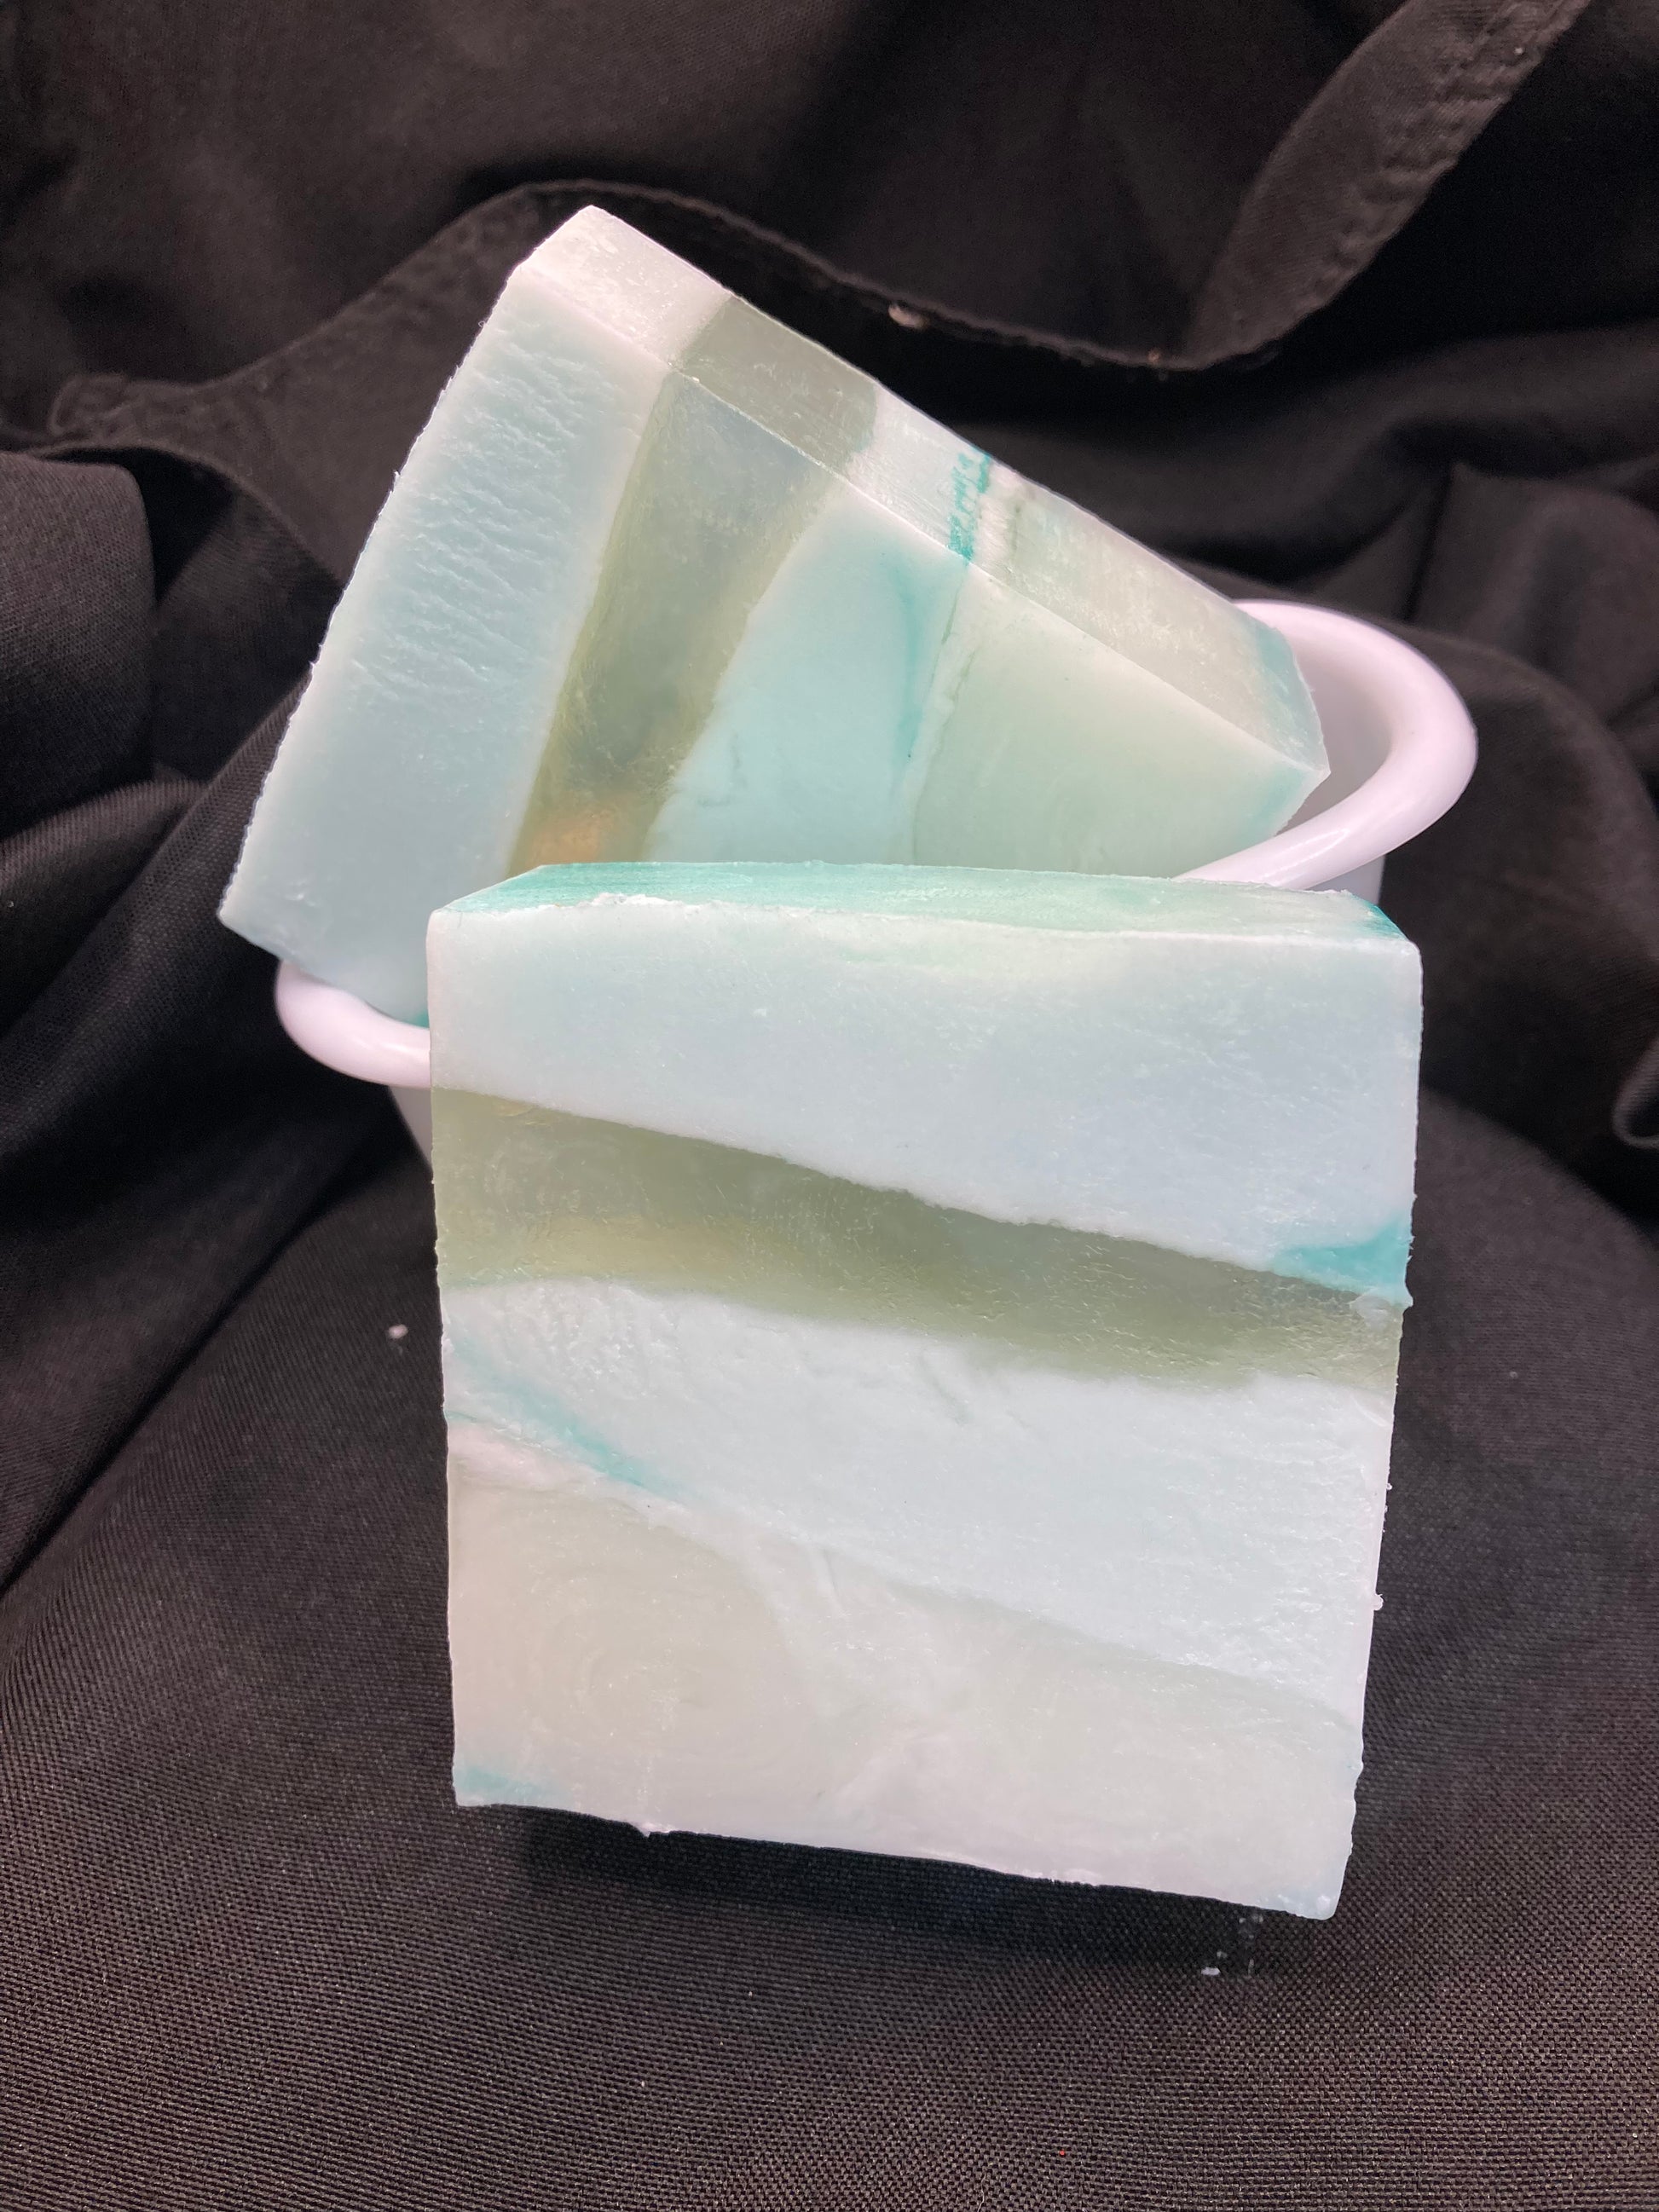 This is a 4 oz bar of Cactus Blossom scented Goats Milk Soap.  The bar also includes Olive Oil and Aloe for a classic scent in a moisturizing soap bar.  It makes bathtime a spa-like experience!  These would make a wonderful bridal shower or wedding favor!  Each item is individually made and may appear different from the photo.